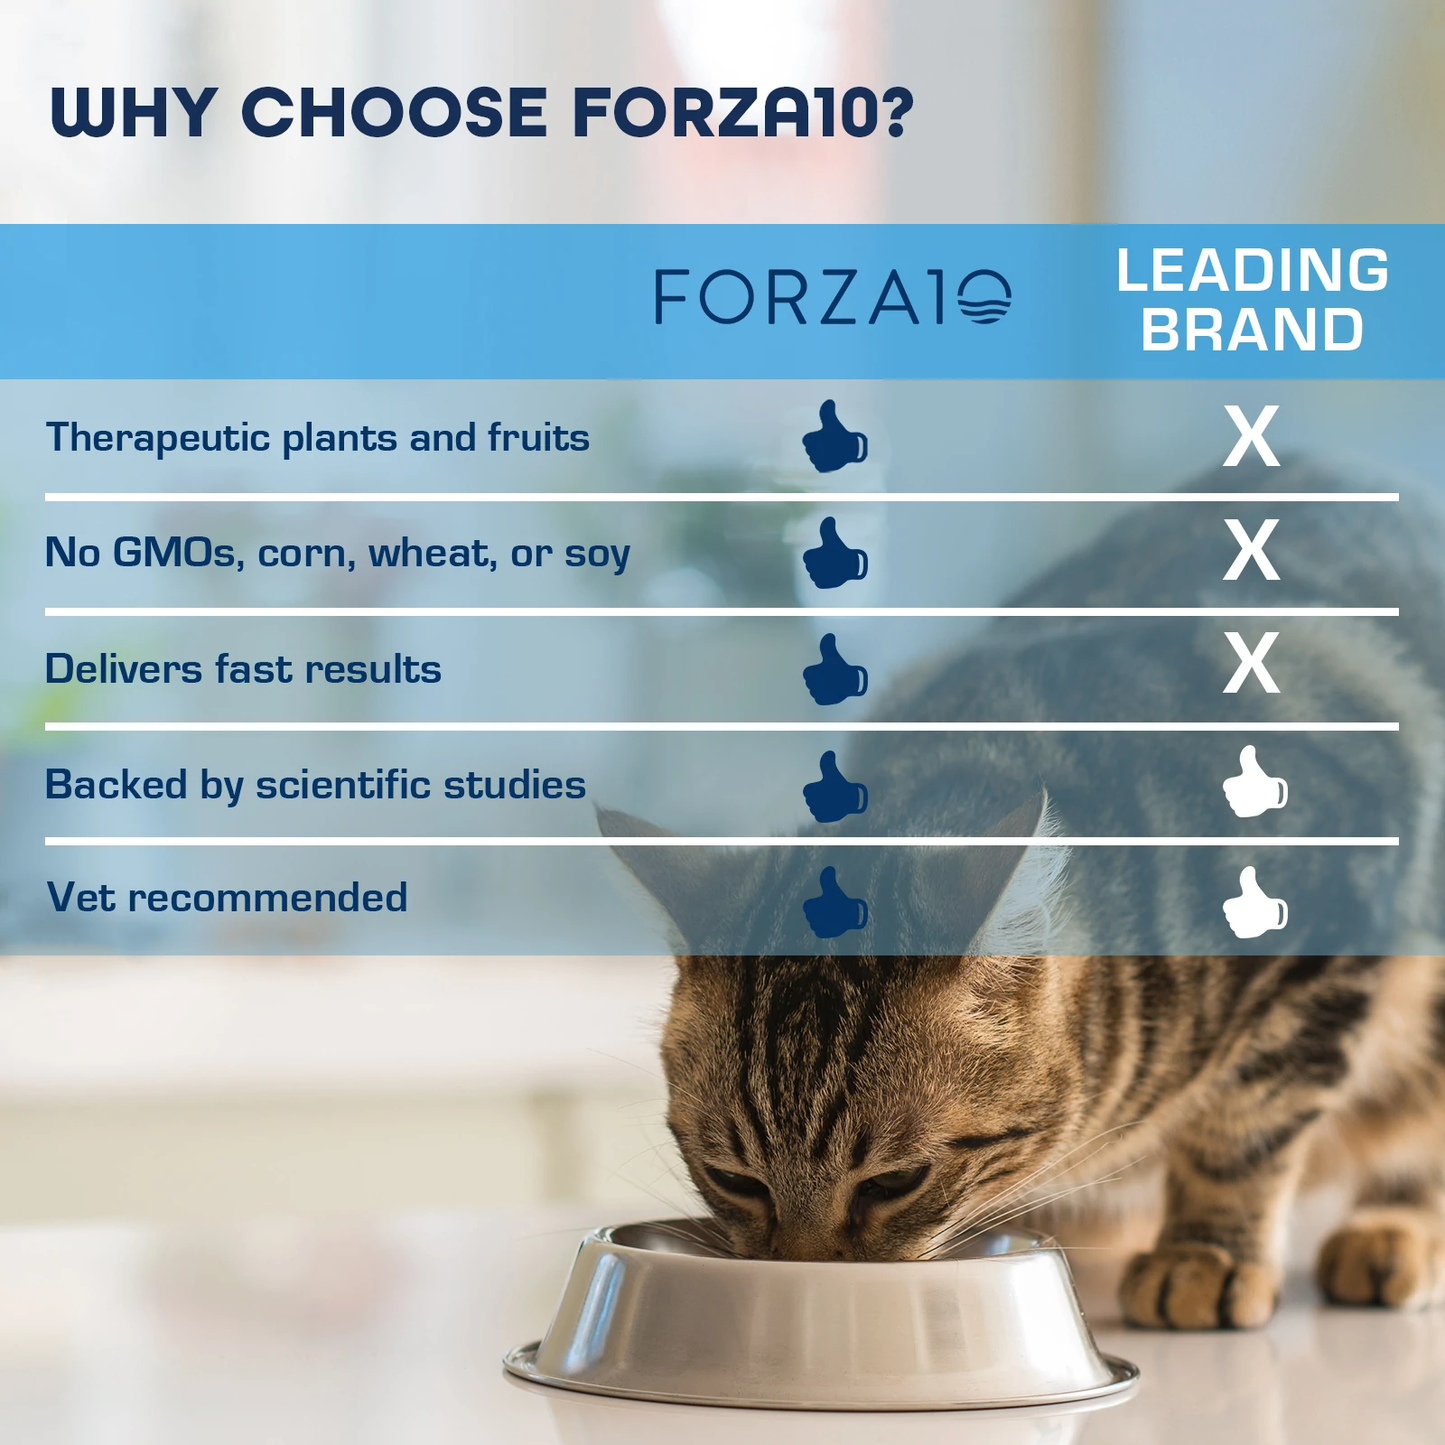 Forza10 Actiwet Renal Support Canned Cat Food